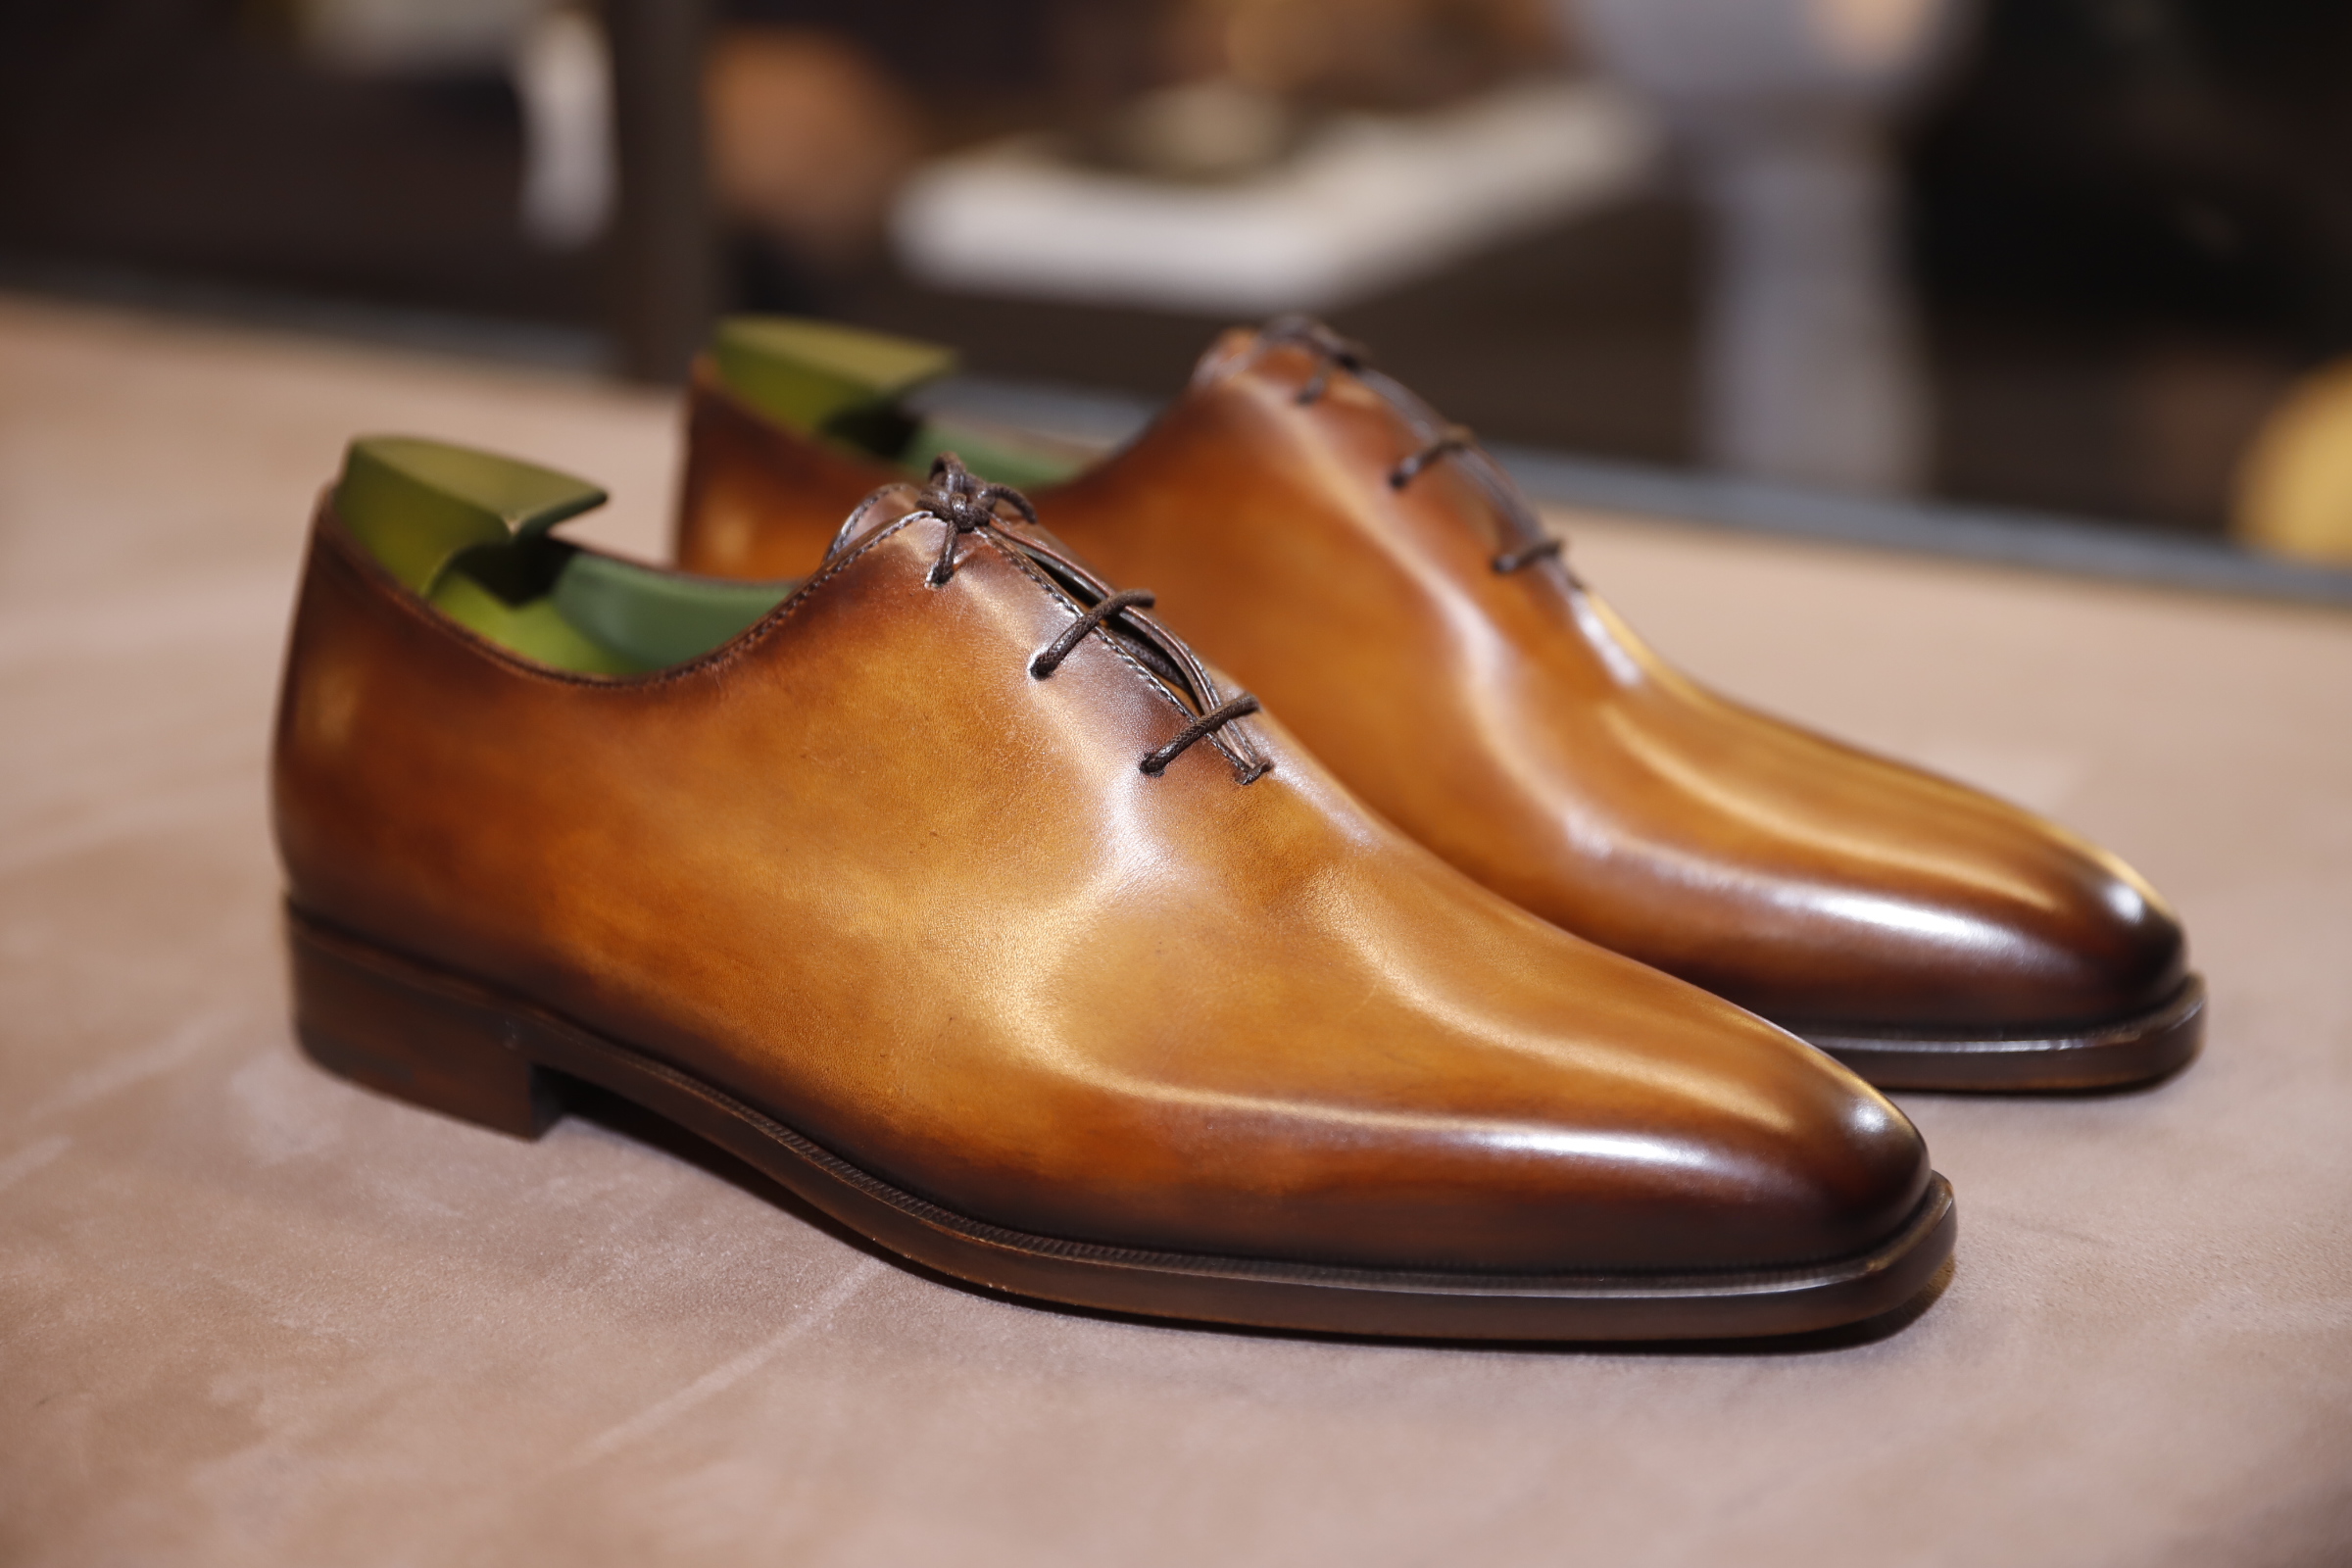 Are Berluti shoes good?